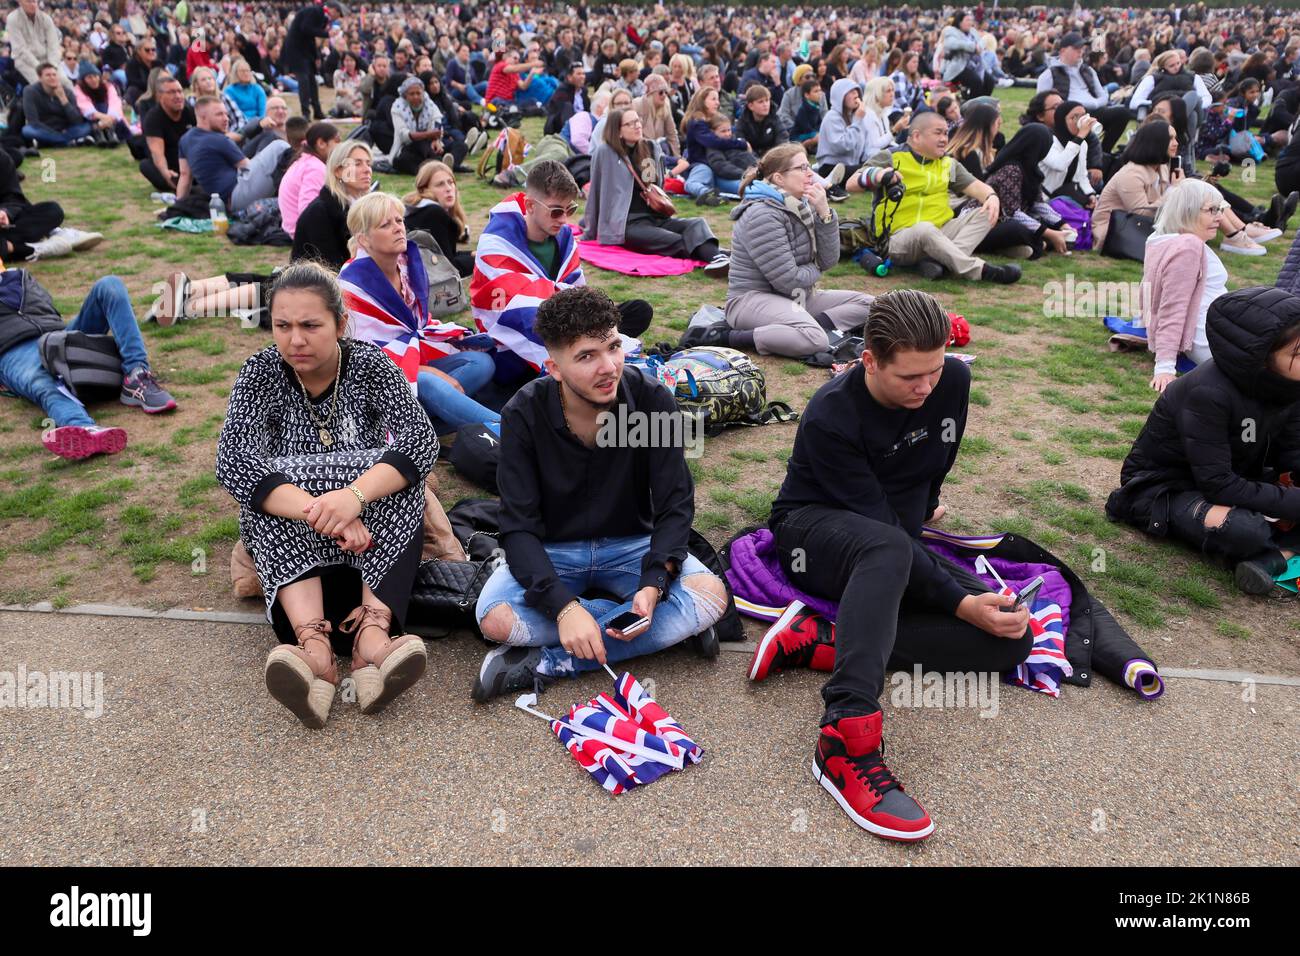 Thousands of members of the public watch the state funeral of Queen Elizabeth II on big screens in London's Hyde Park. Stock Photo